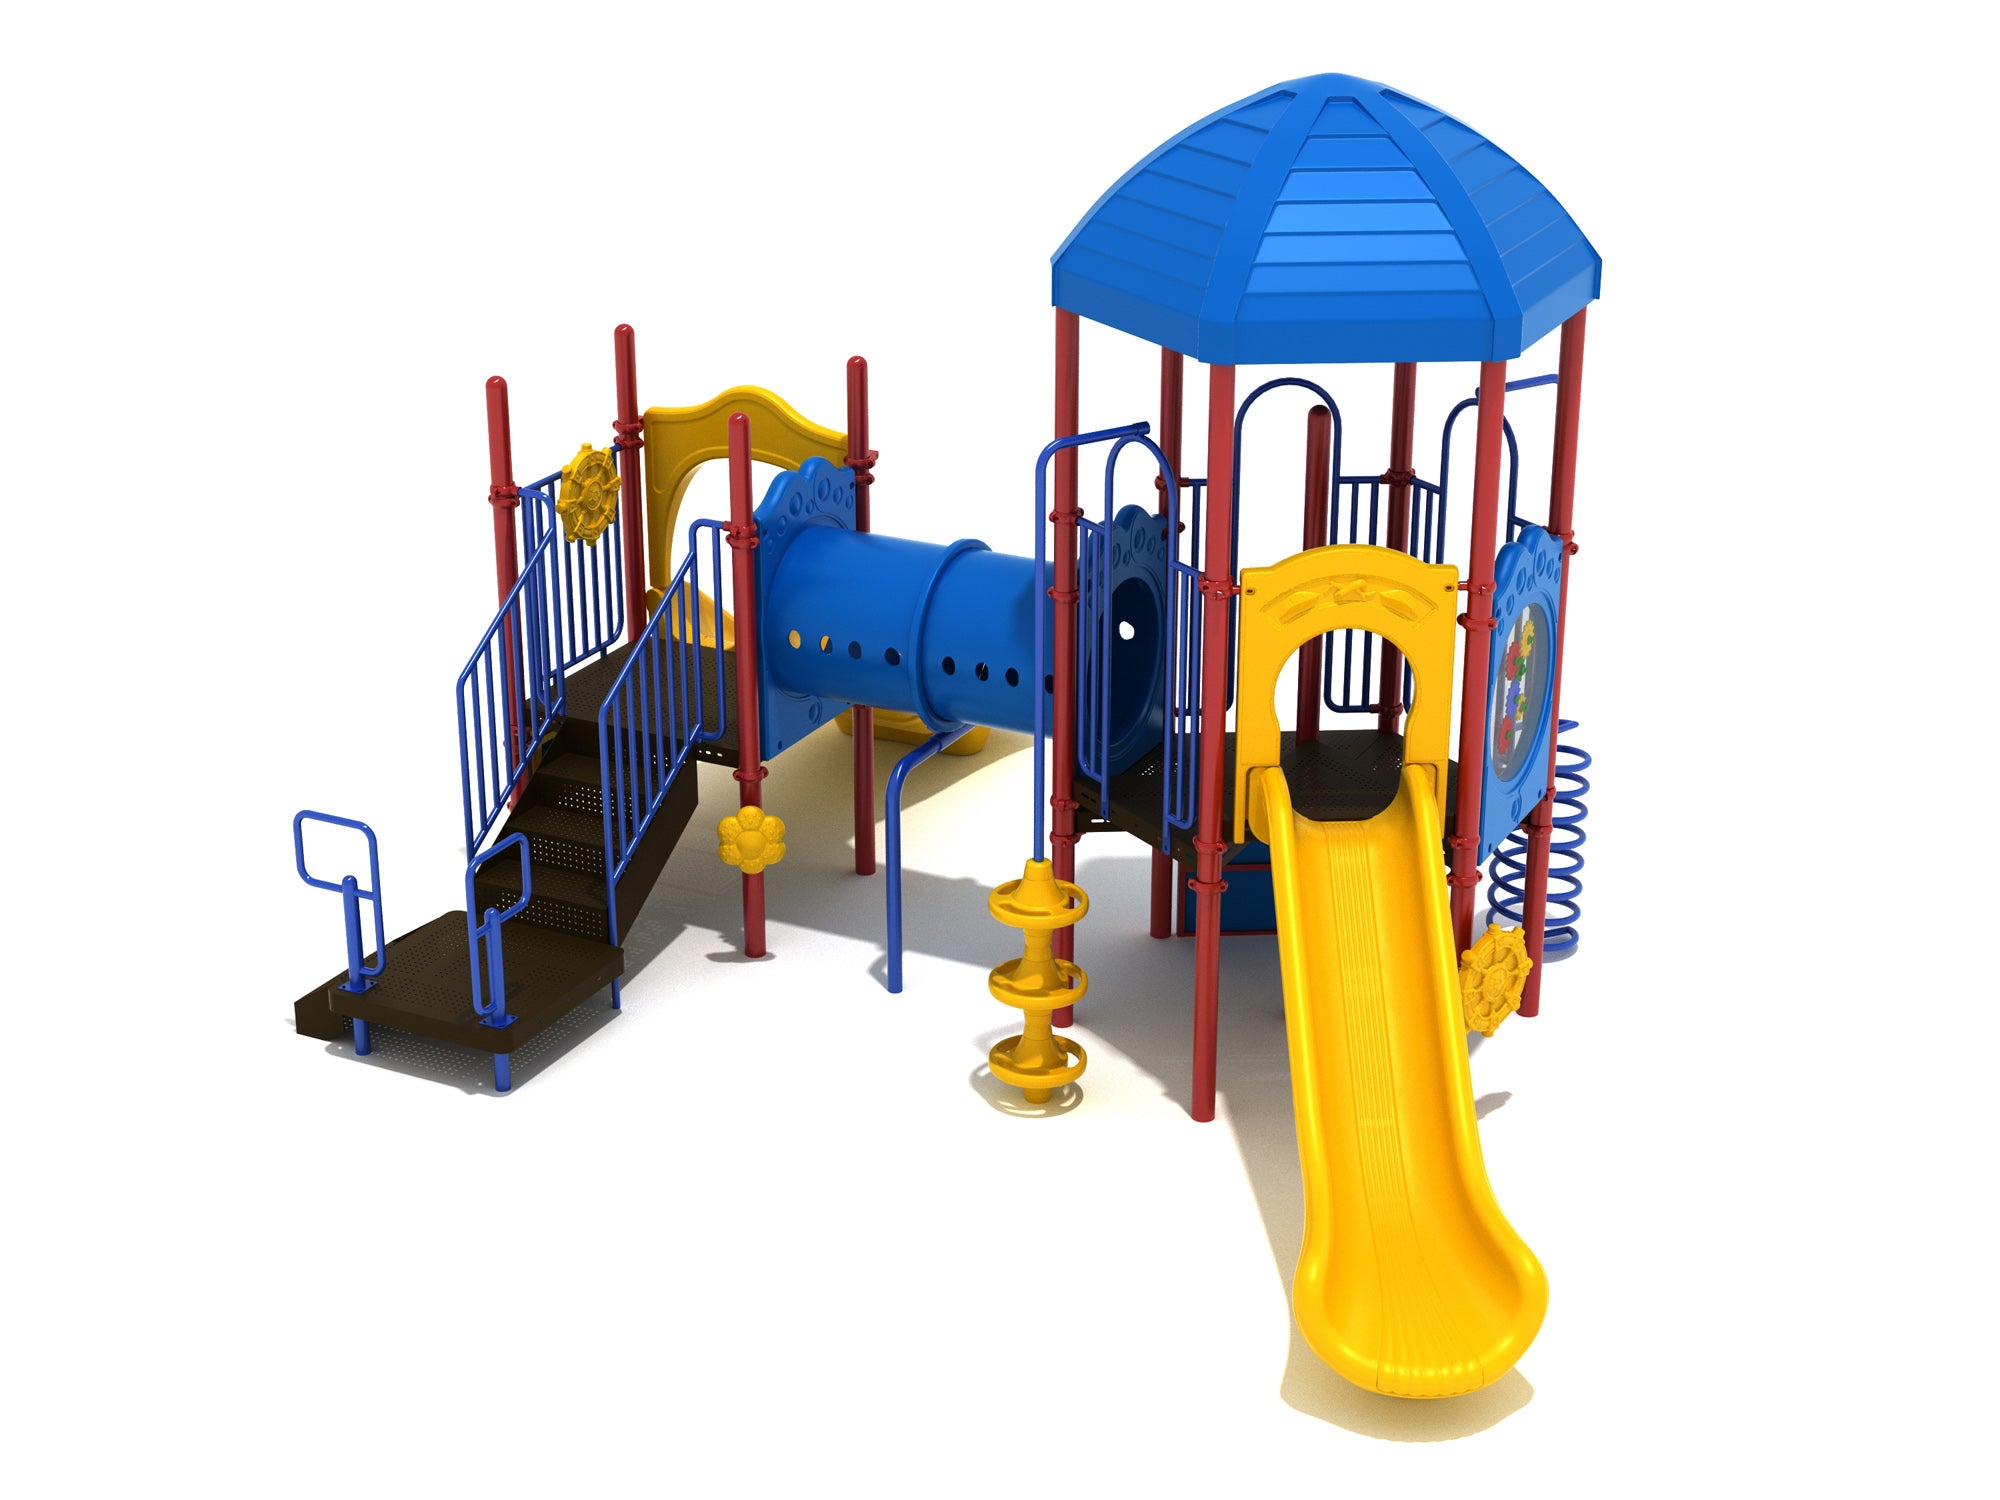  Analyzing image     Playground-Equipment-Commercial-Playgrounds-Mankato-Front